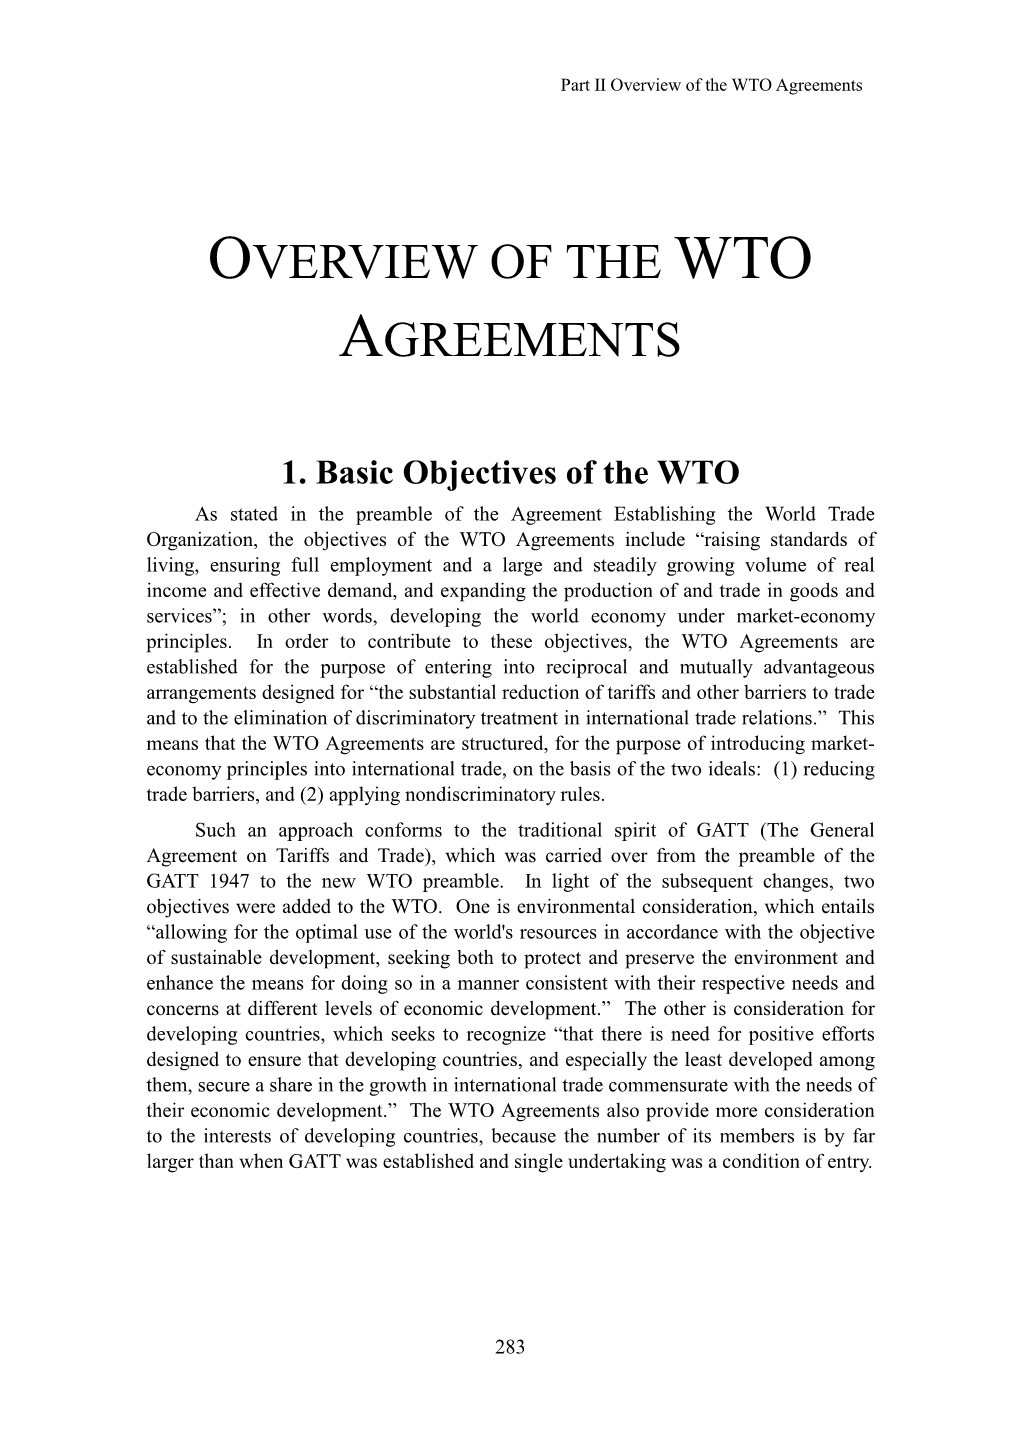 Overview of the WTO Agreements